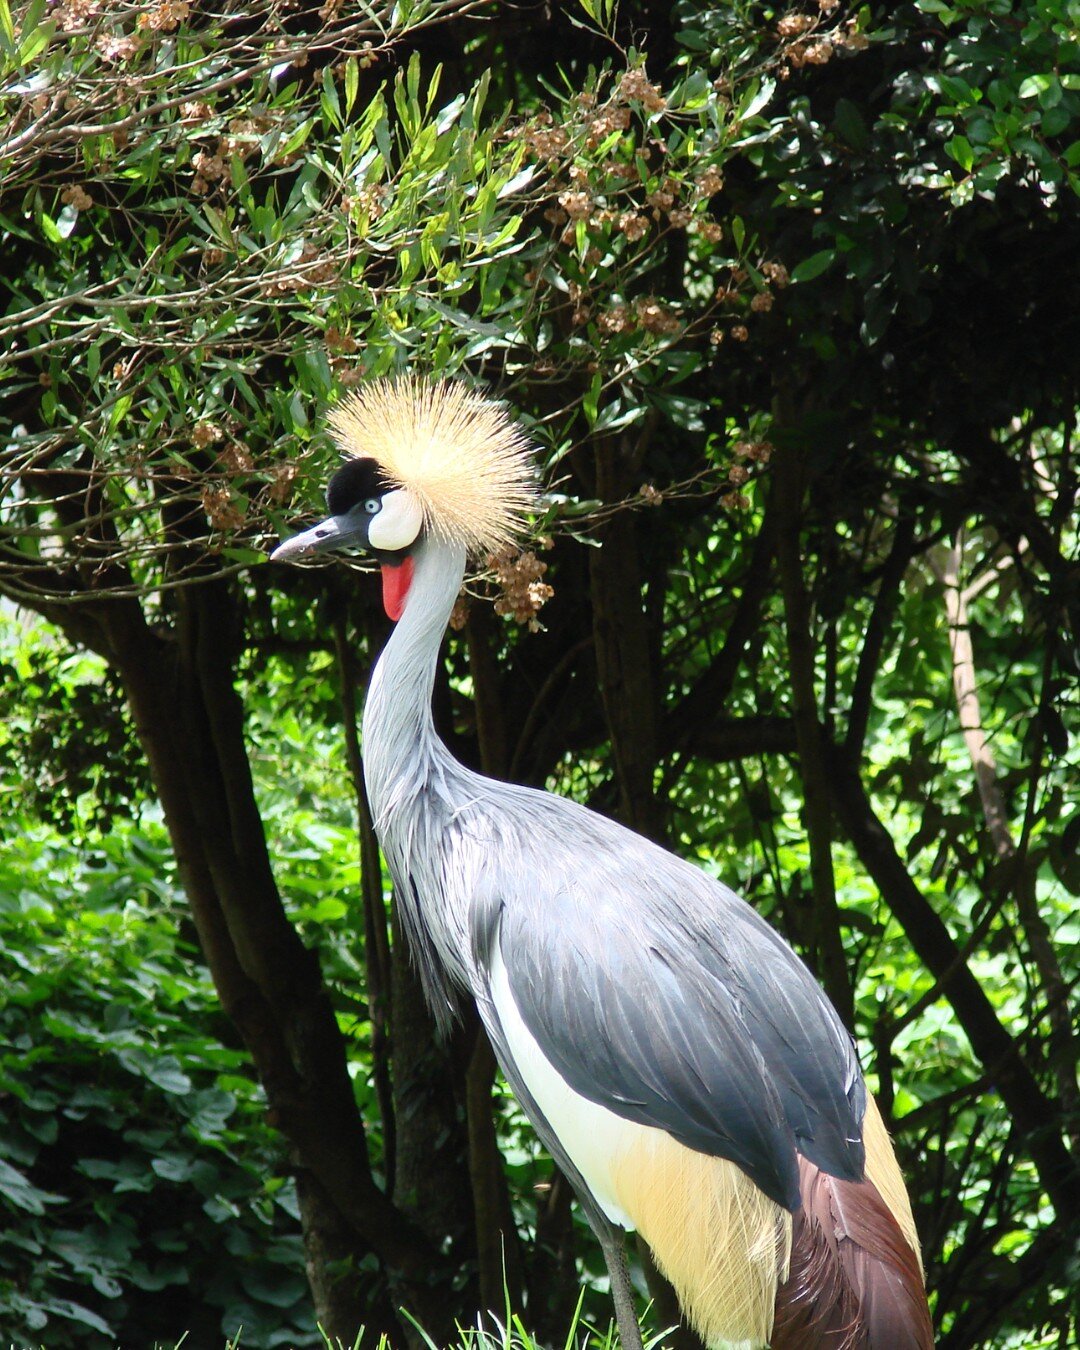 The Grey Crowned Crane

This incredible bird is the national bird of Uganda and can be found on the country's flag and coat of arms. 

When on safari with us in Uganda you will be sure to see lots of these incredible birds! 

Head online now to view 